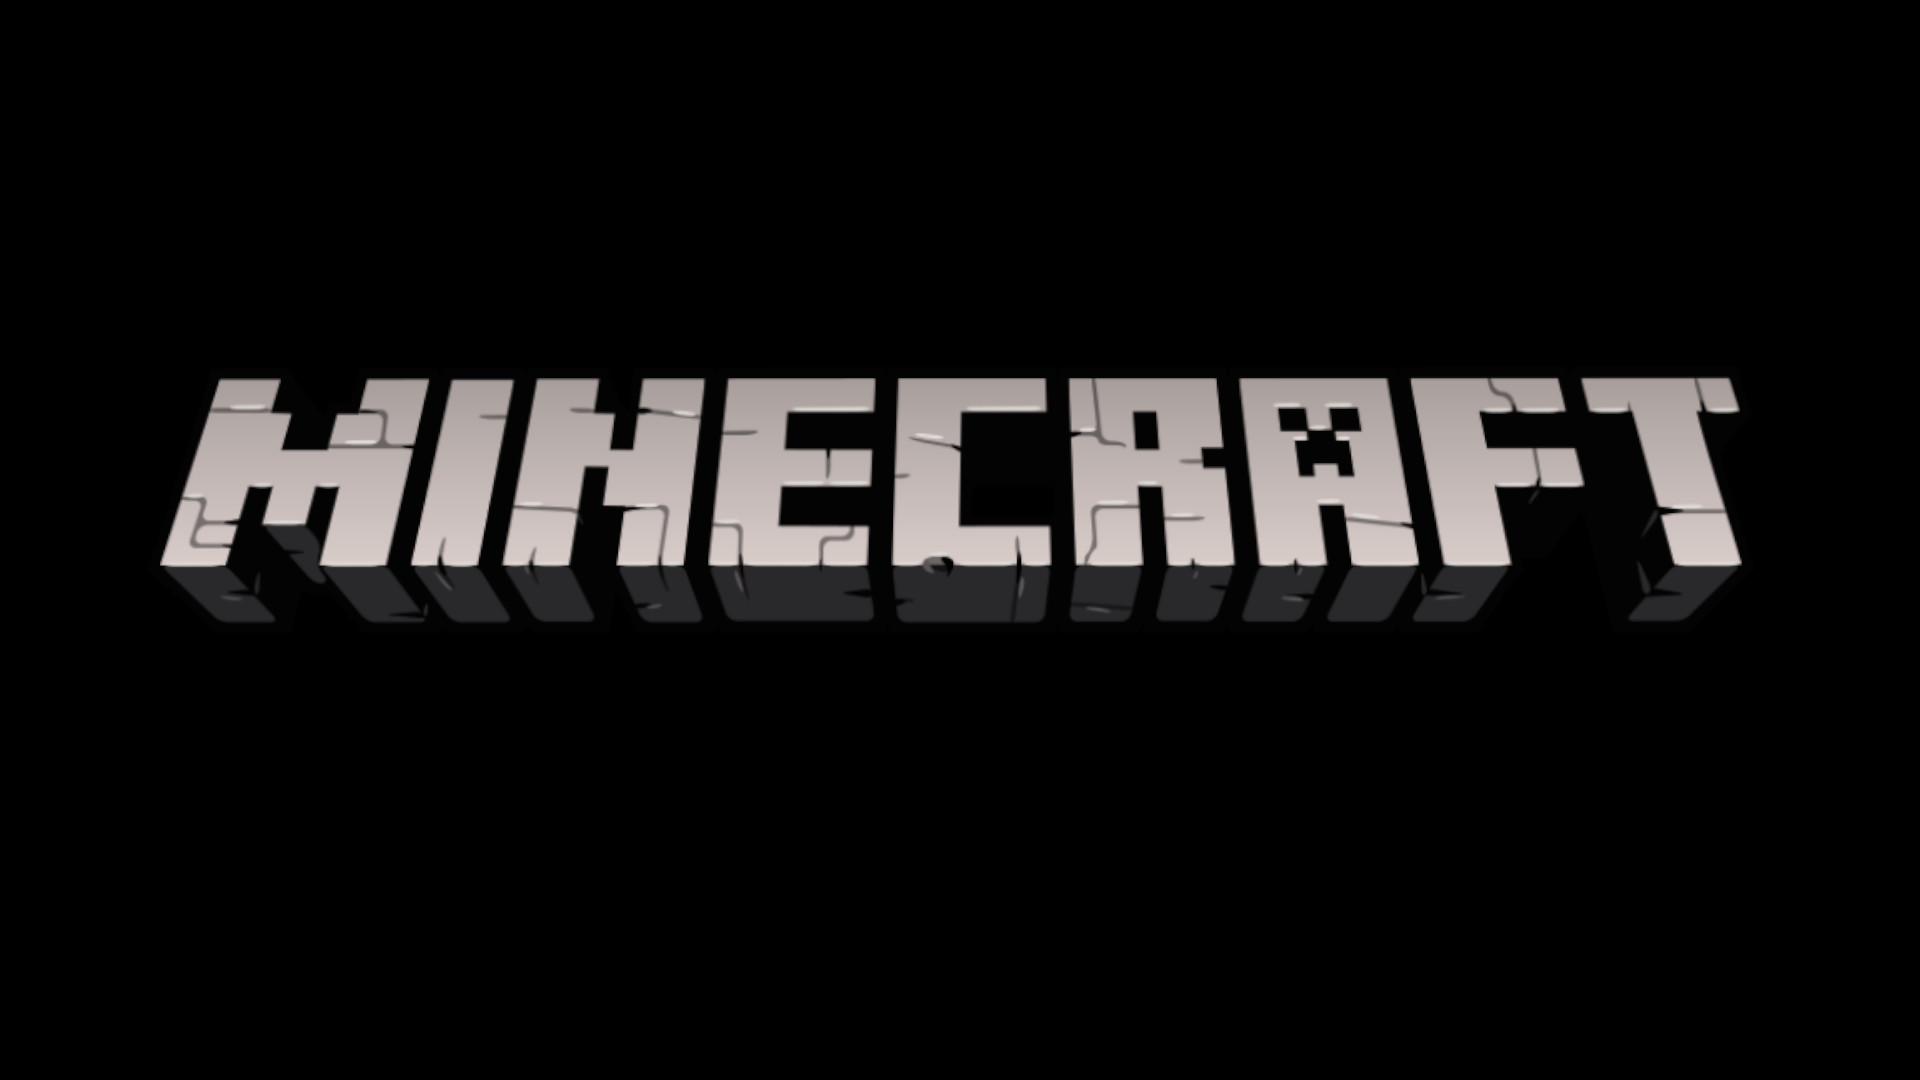 The release date for the Minecraft movie was today